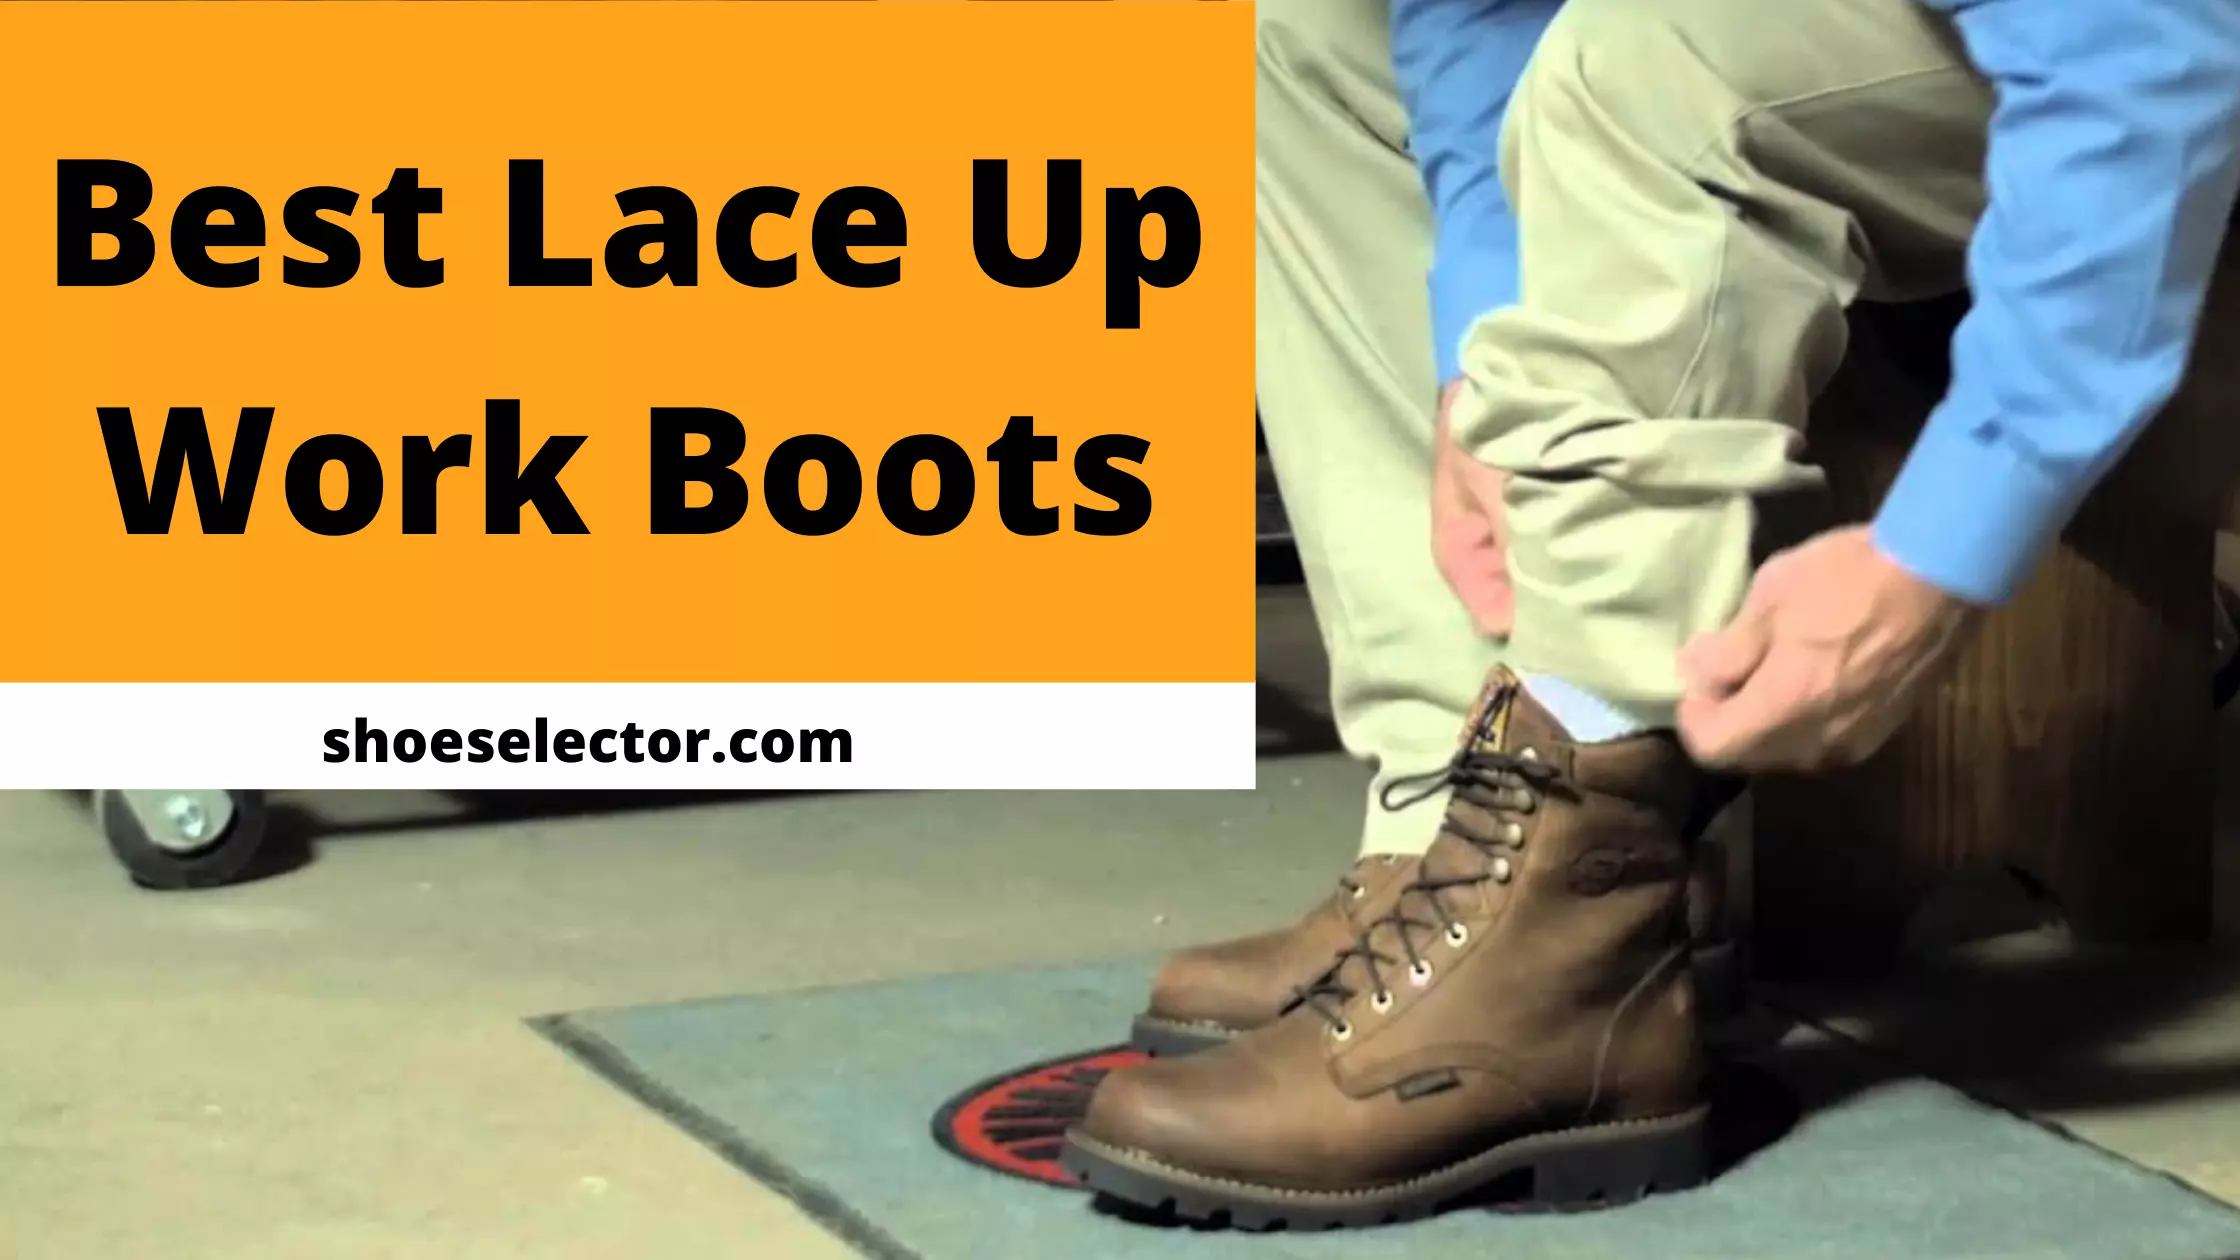 Best Lace Up Work Boots With Complete Buying Guides